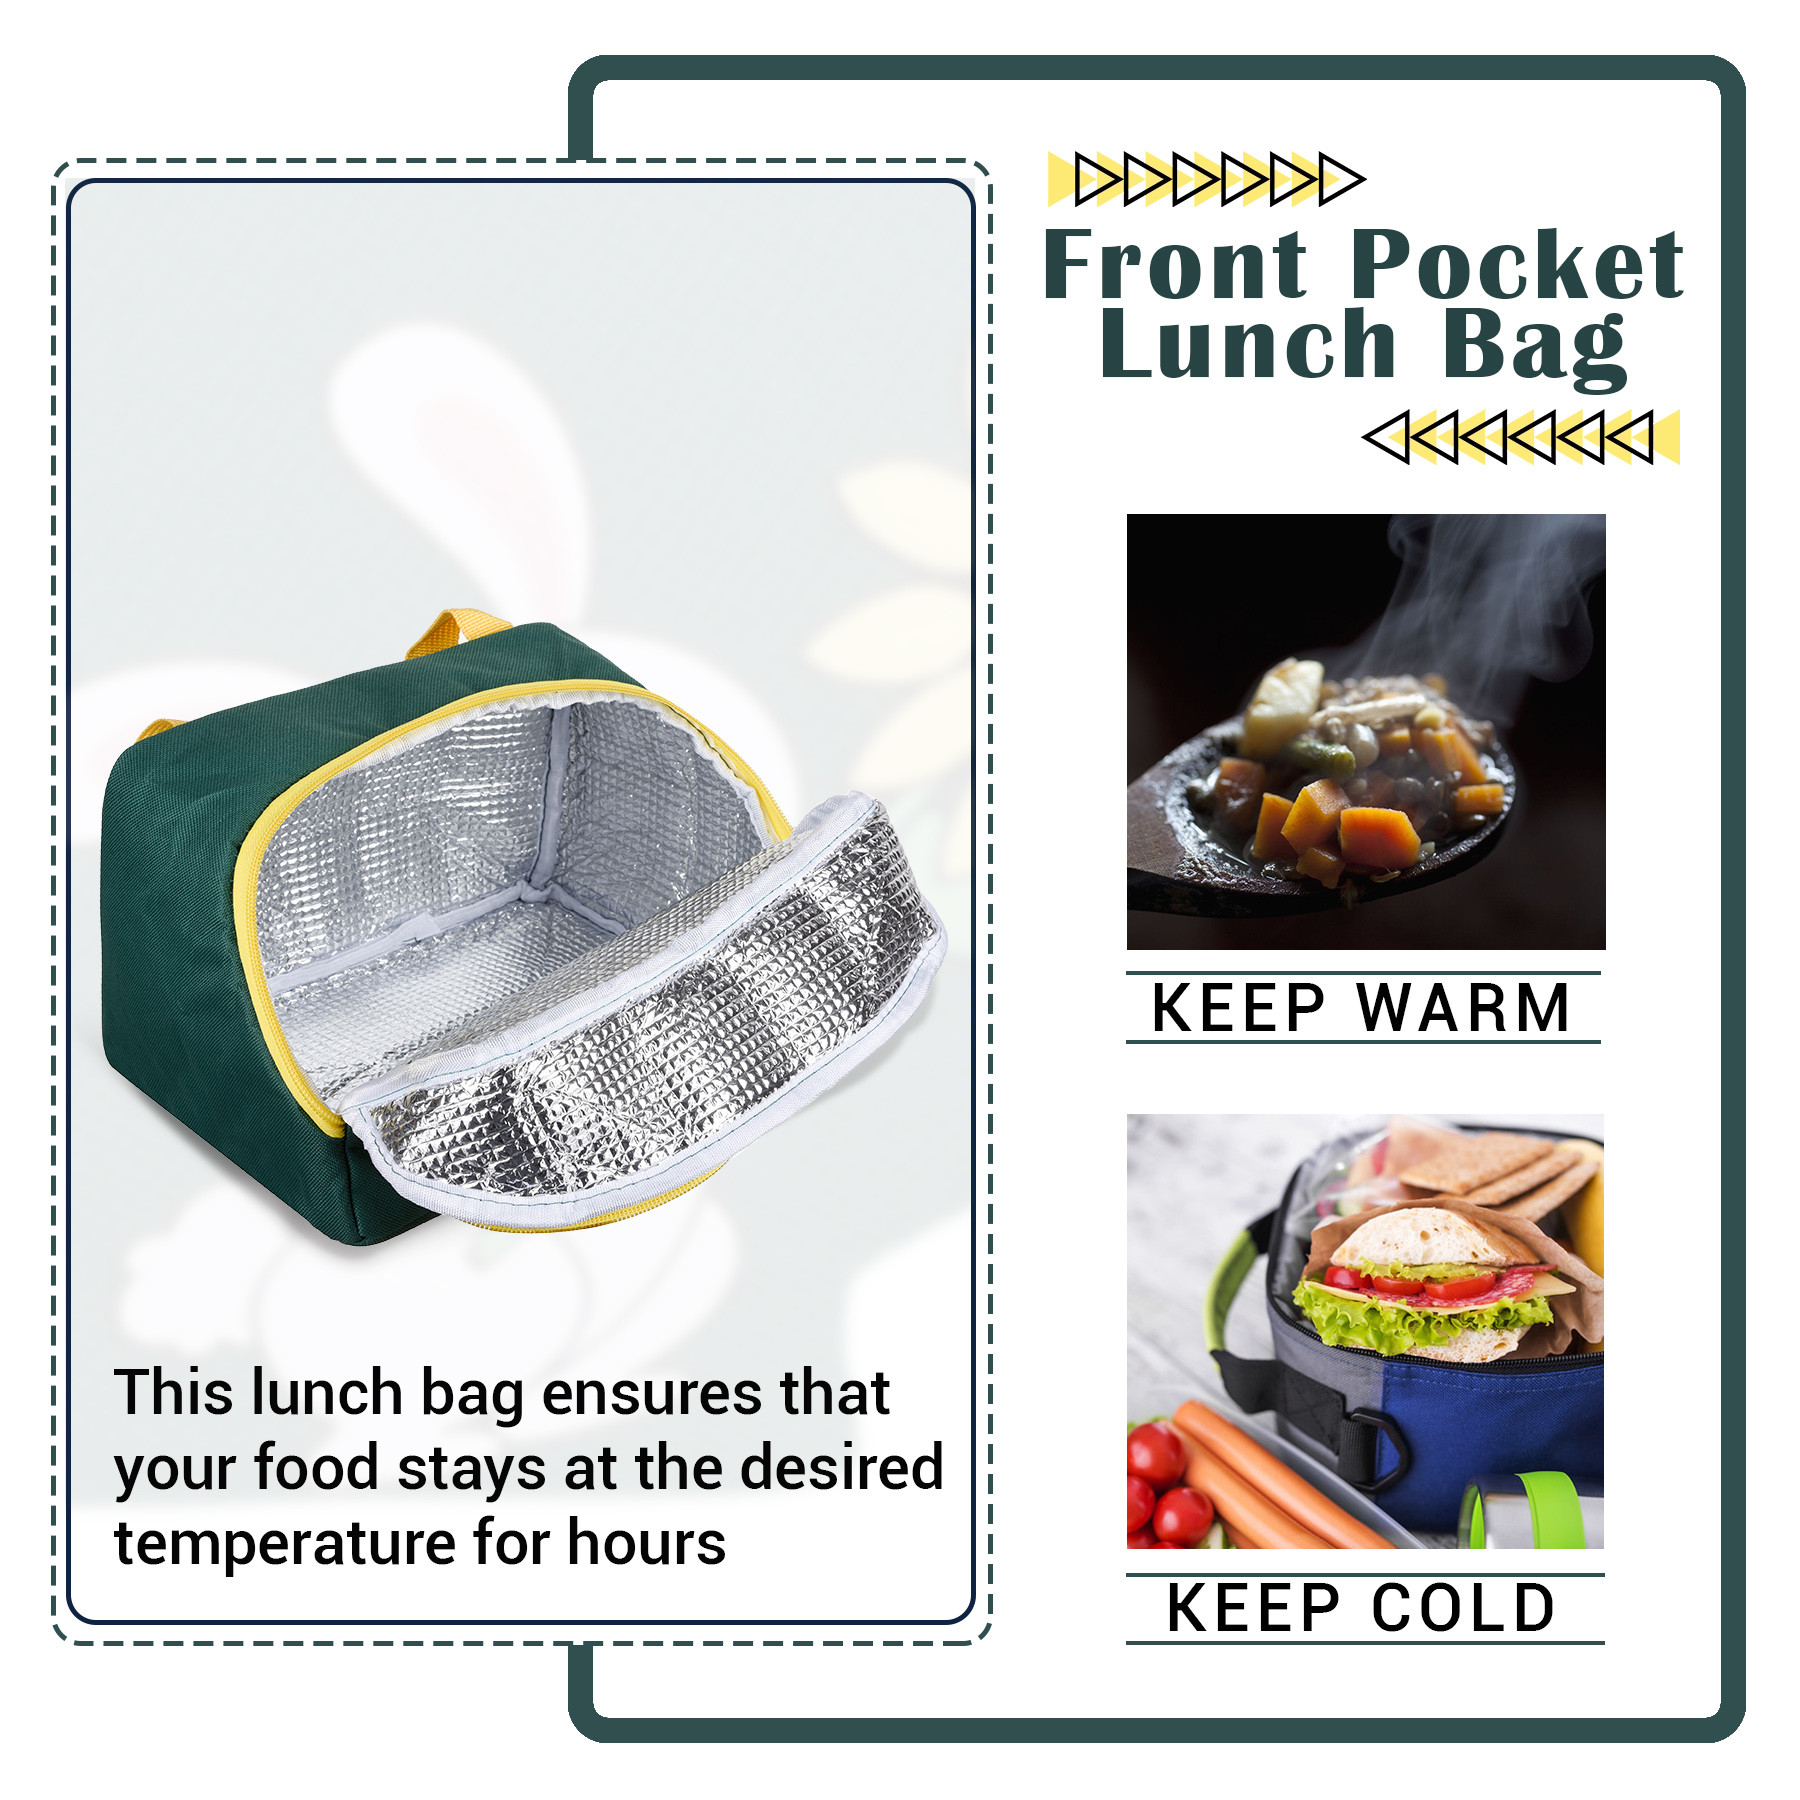 Kuber Industries Lunch Bag | Thermal Insulated Lunch Bag | Lunch Bag for Office | Lunch Bag for Camping with Front Pocket | Waterproof Tiffin Cover with Handle | Summer Rabbit | Green